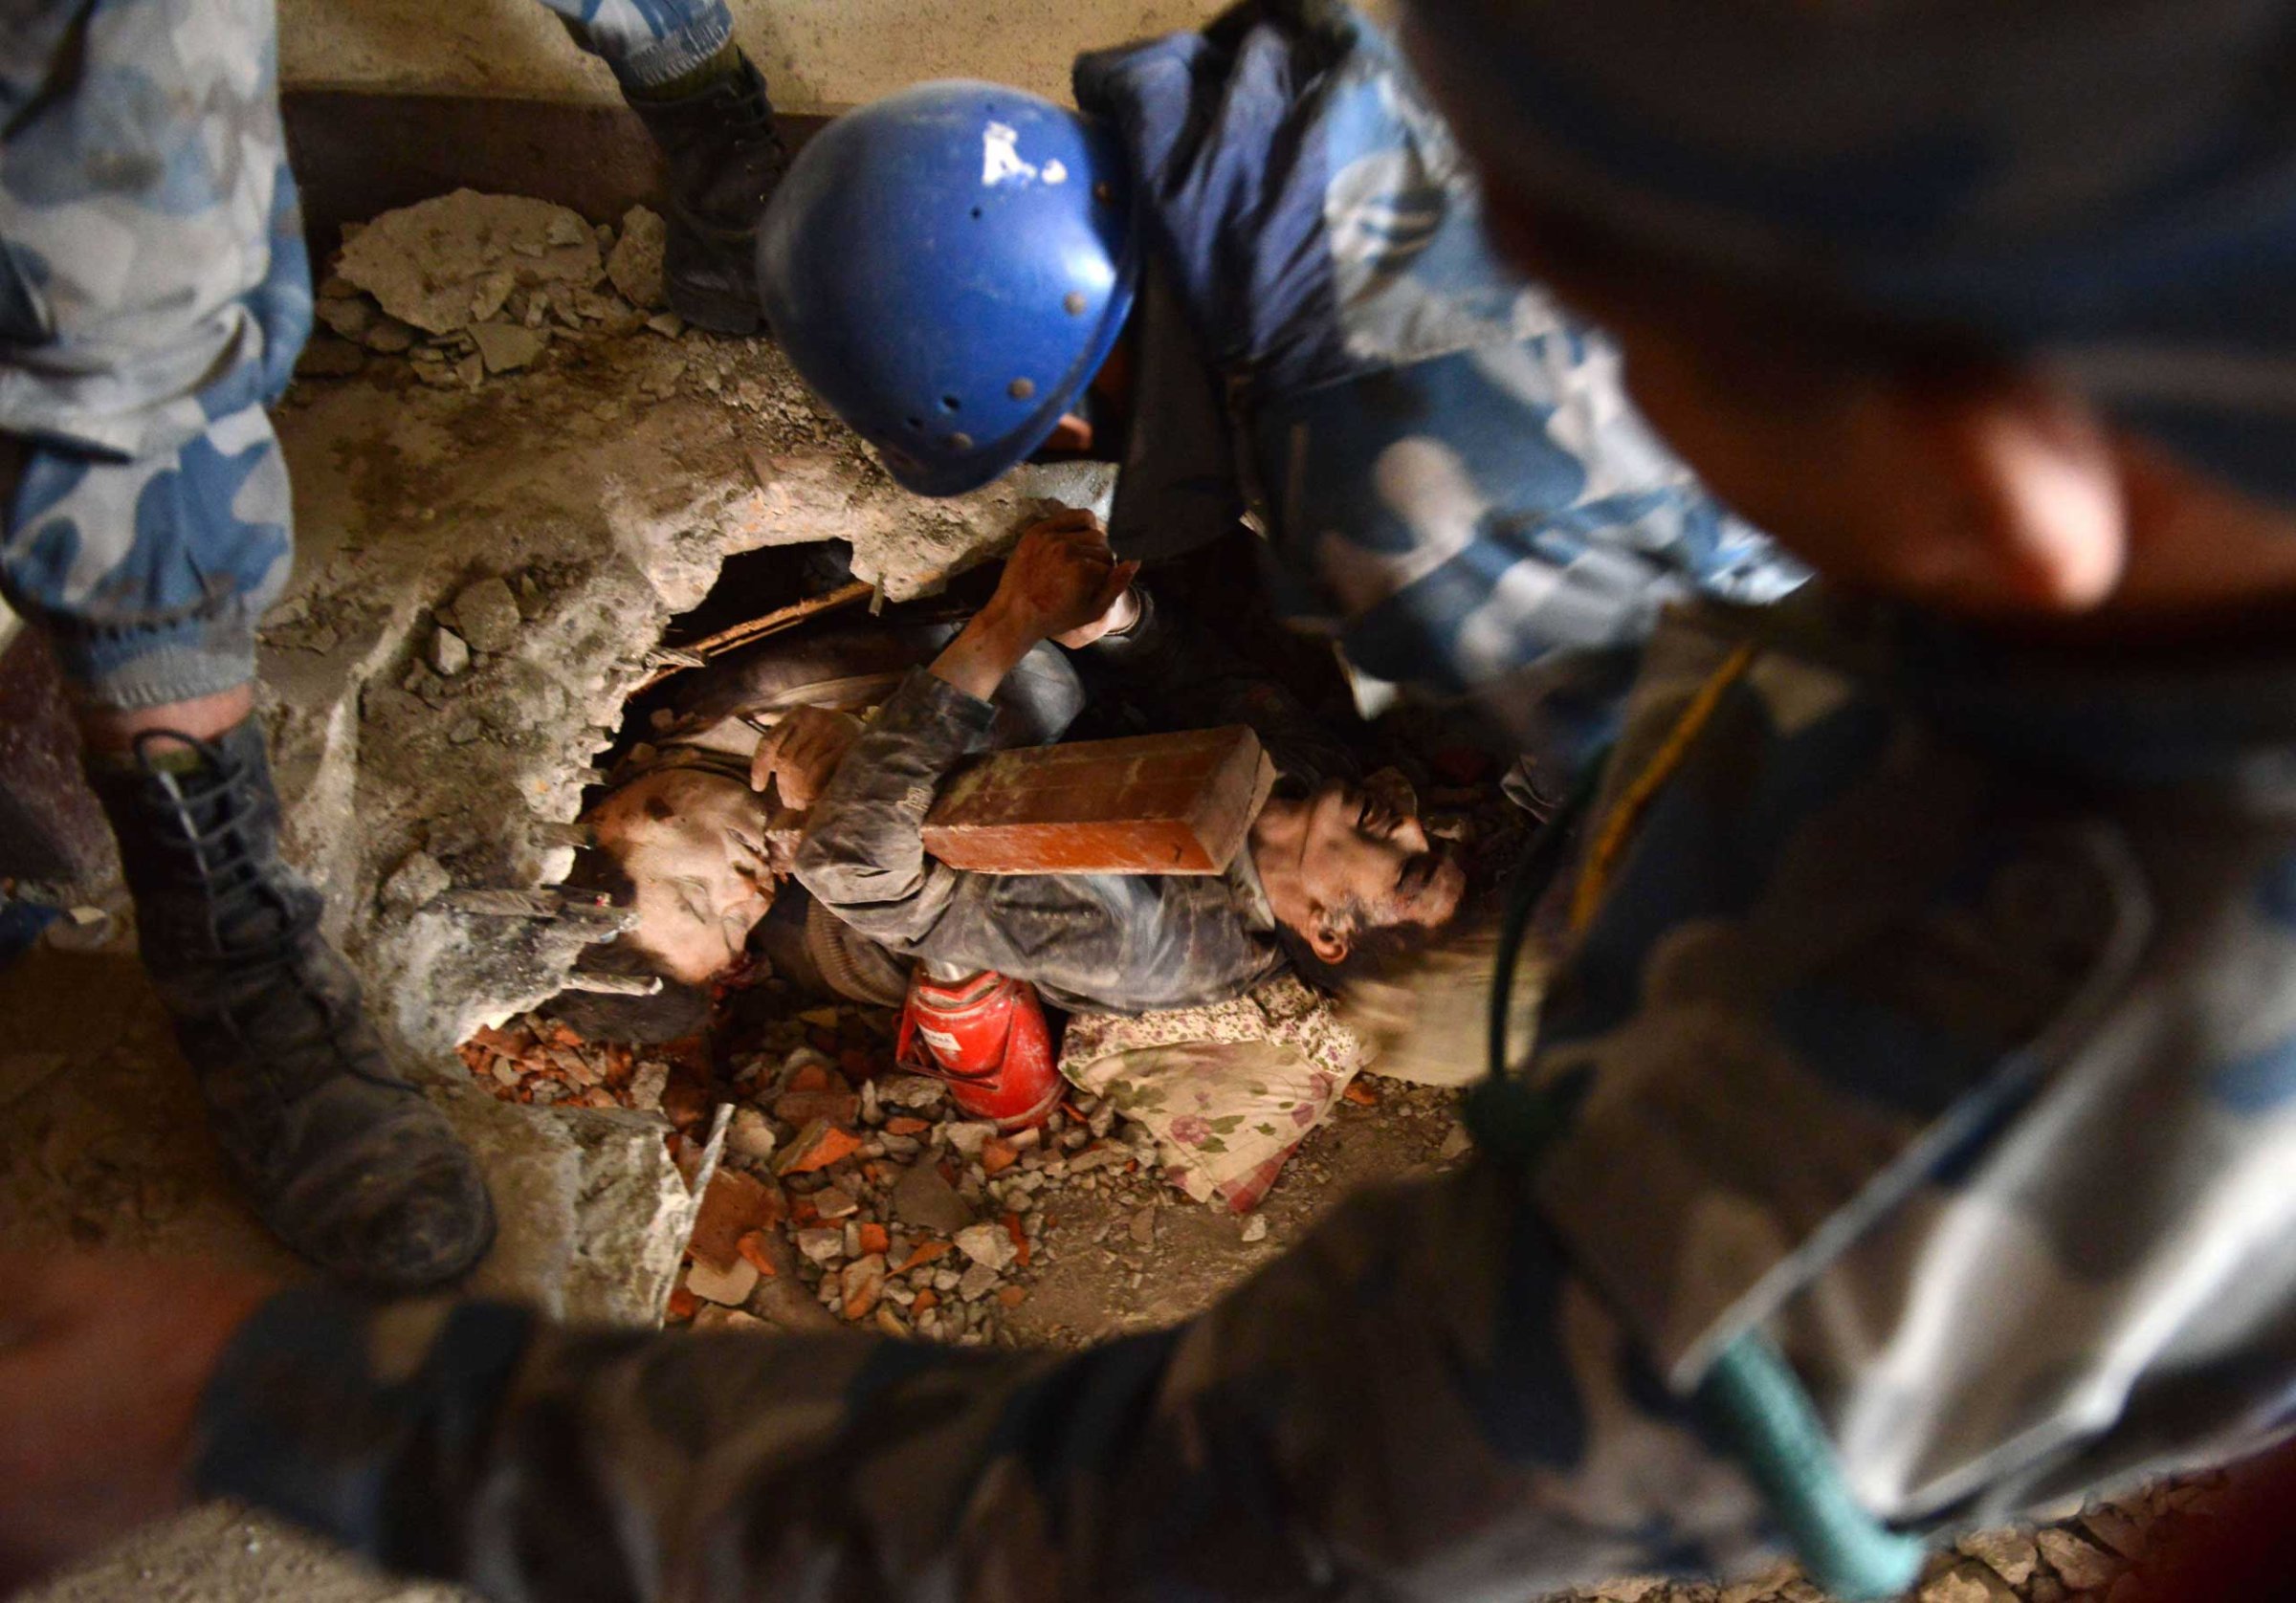 Nepalese rescue personnel help a trapped earthquake survivor, center right, as his friend lies dead next to him in Swyambhu, in Kathmandu on April 26, 2015.